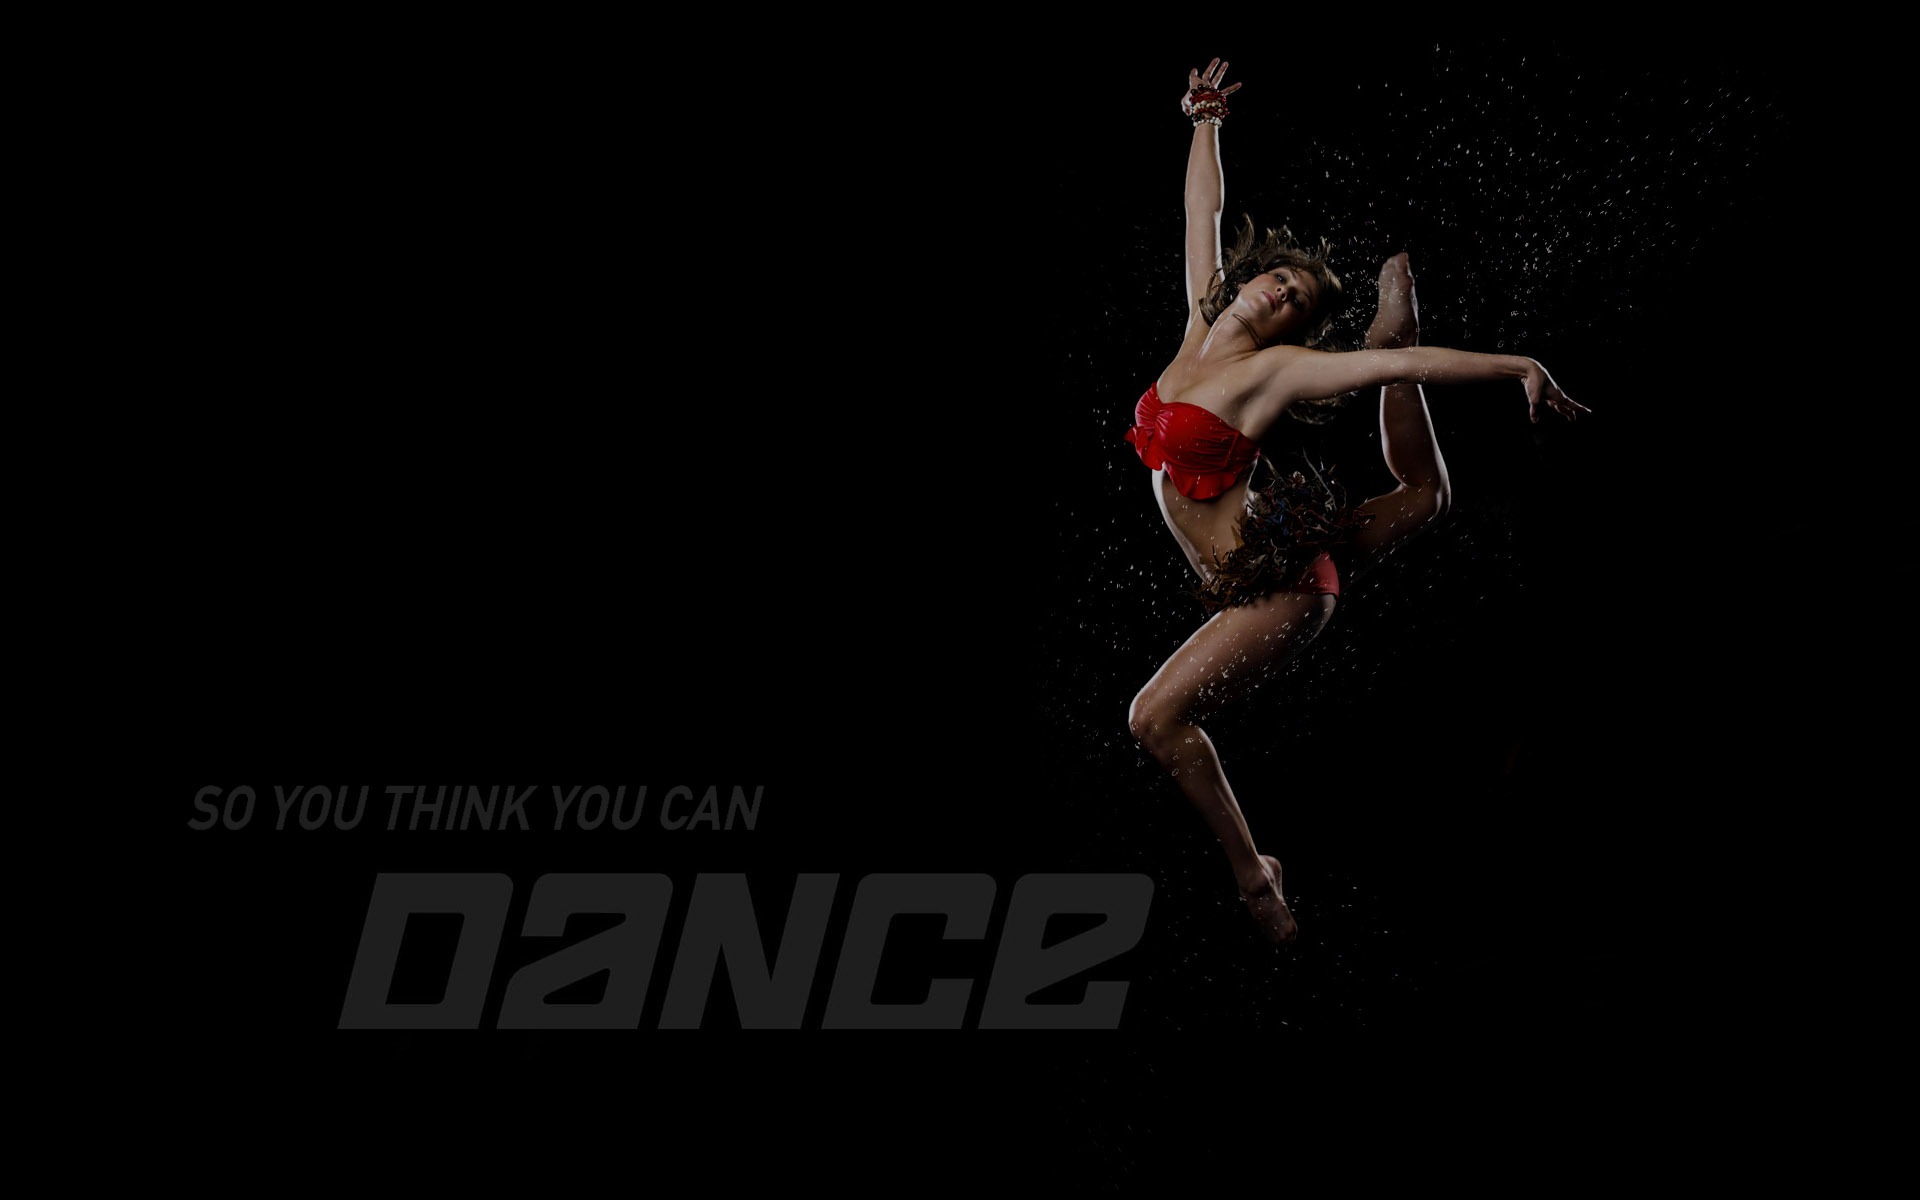 So You Think You Can Dance wallpaper (2) #13 - 1920x1200